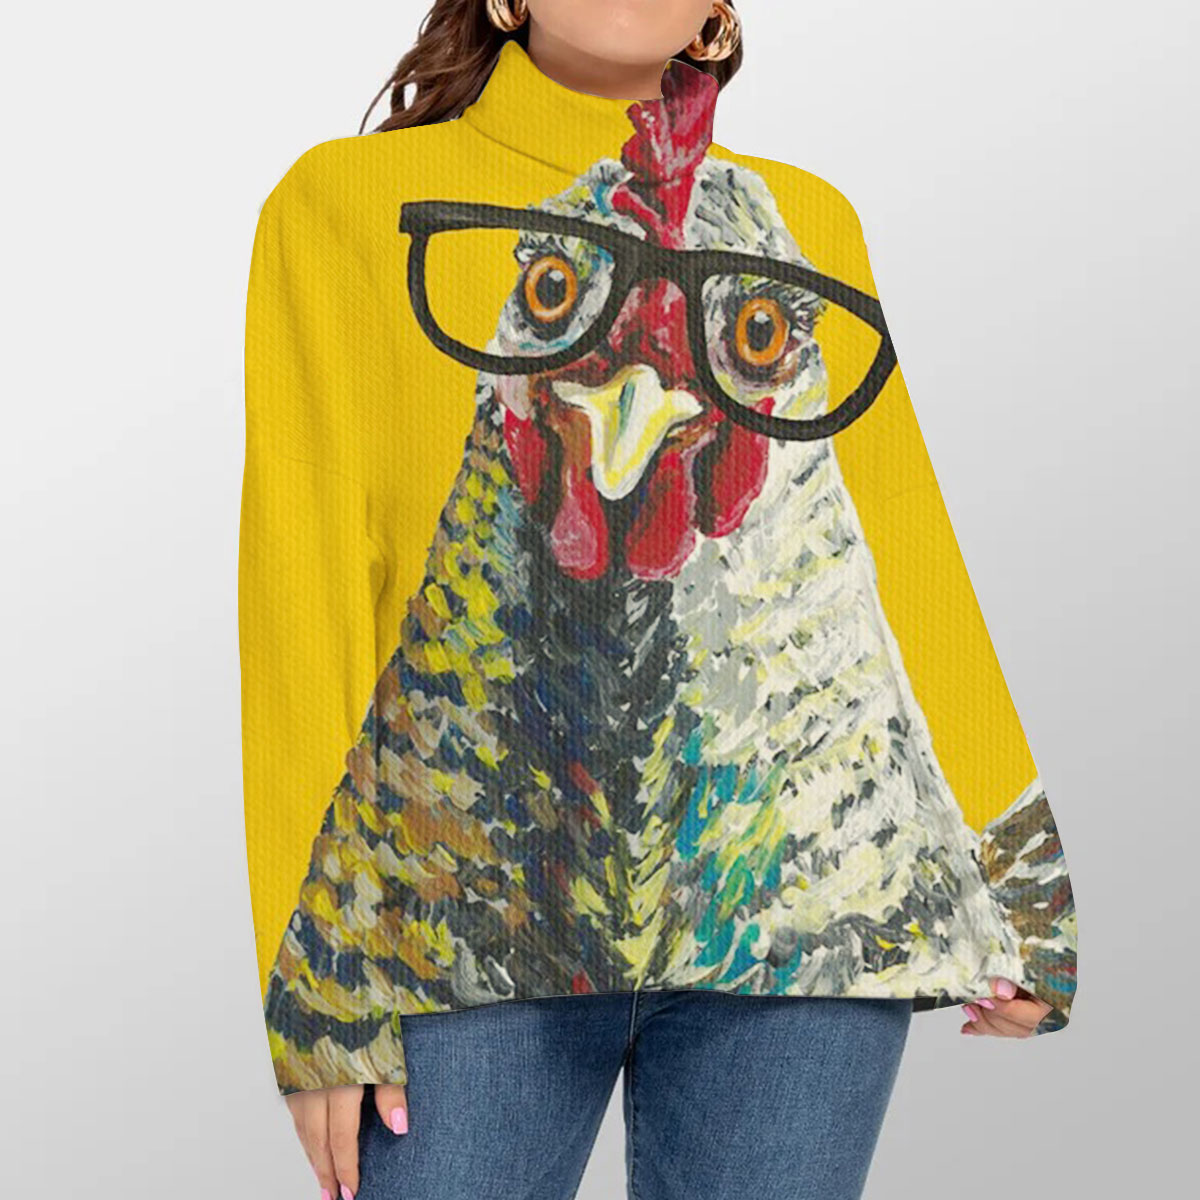 Chicken With Glasses Turtleneck Sweater